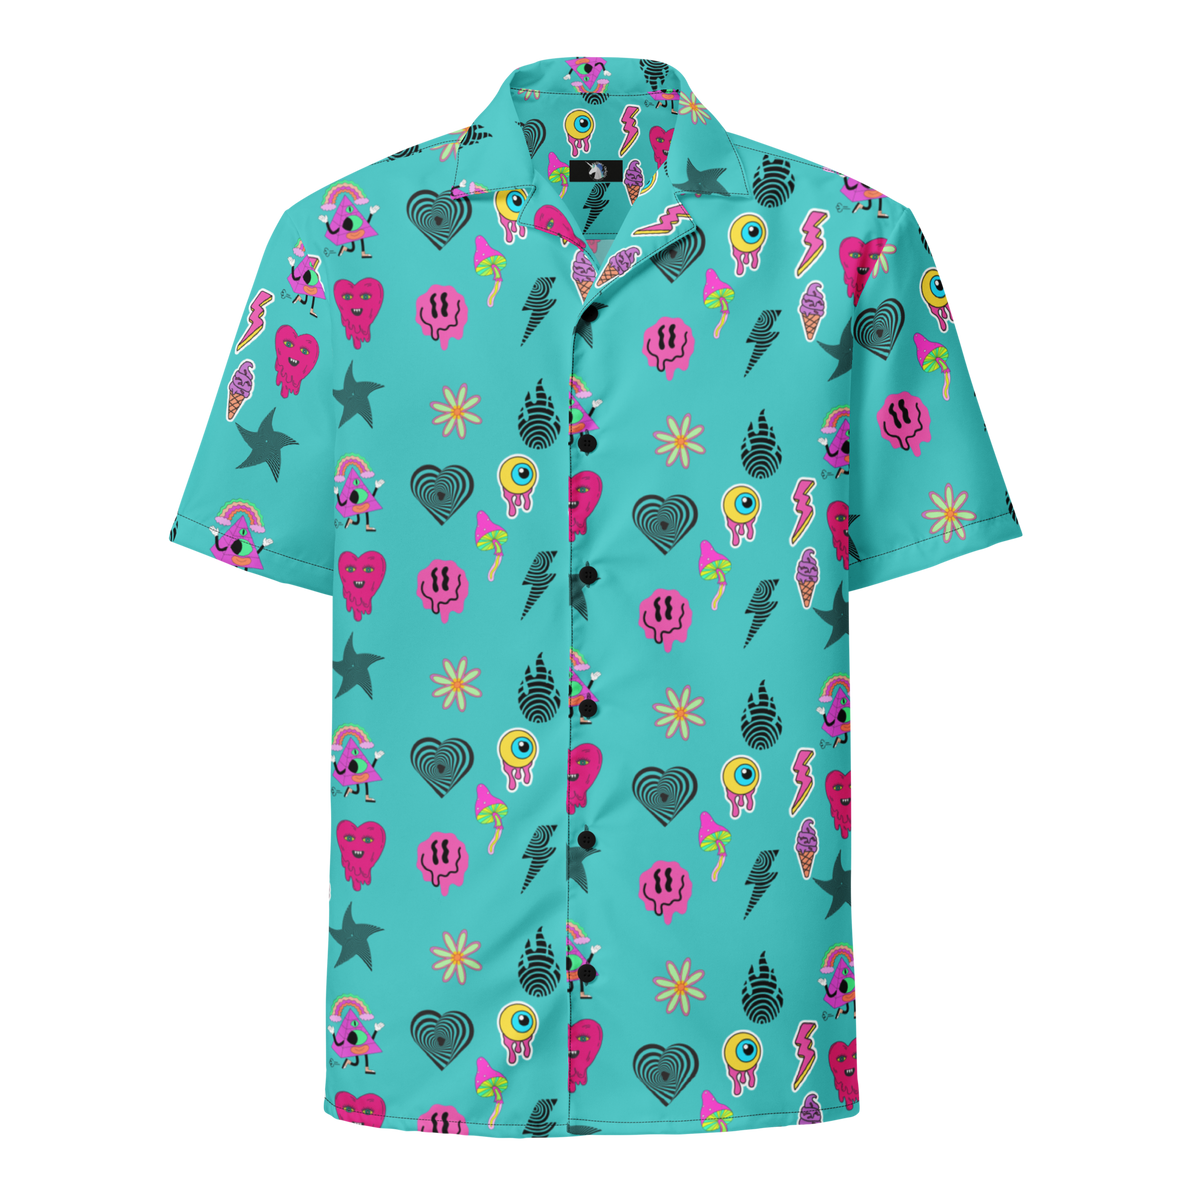 Turquoise Shirt, Oversized Button Shirt, Hot Pink Prints, Melting Hearts, Melting Smiley Faces, Melting Eyes, Psychedelic Vibes, Vibrant Fashion, Statement Piece, Unique Style, Bold Colors, Eye-catching Design, Psychedelic Print, Fashionable Shirt, Trendy Apparel, Expressive Fashion, Colorful Clothing, Stand Out Style, button up shirt